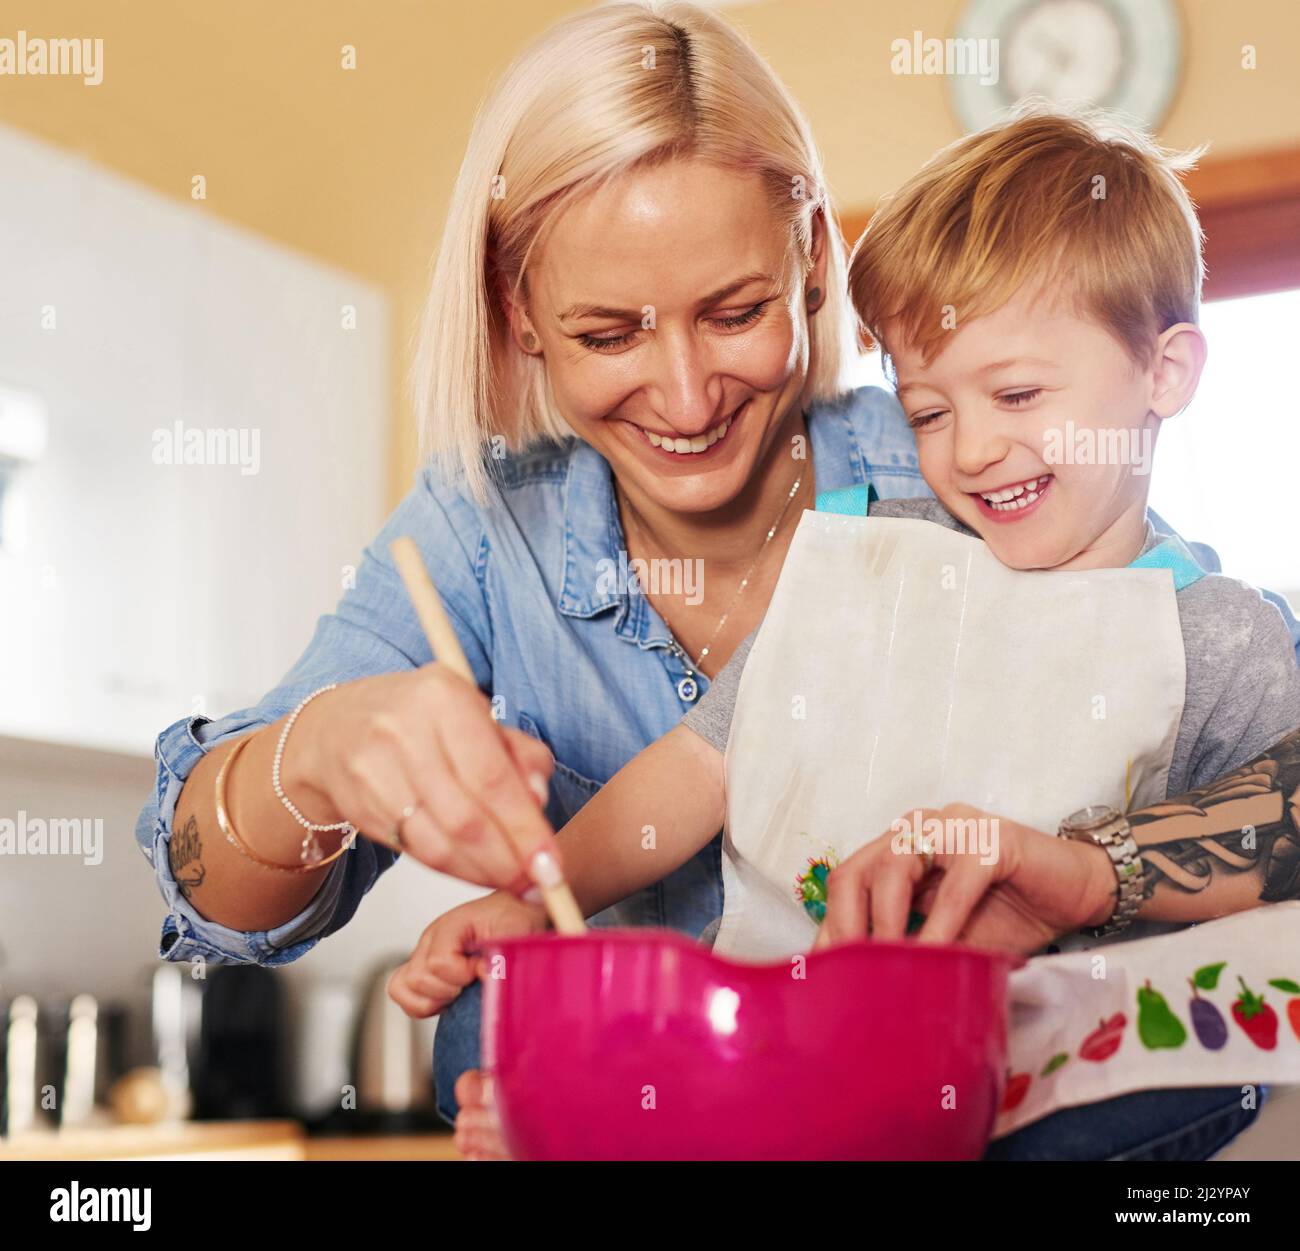 The secret ingredient is adding some fun into the mix. Cropped shot of a mother and son baking together at home. Stock Photo